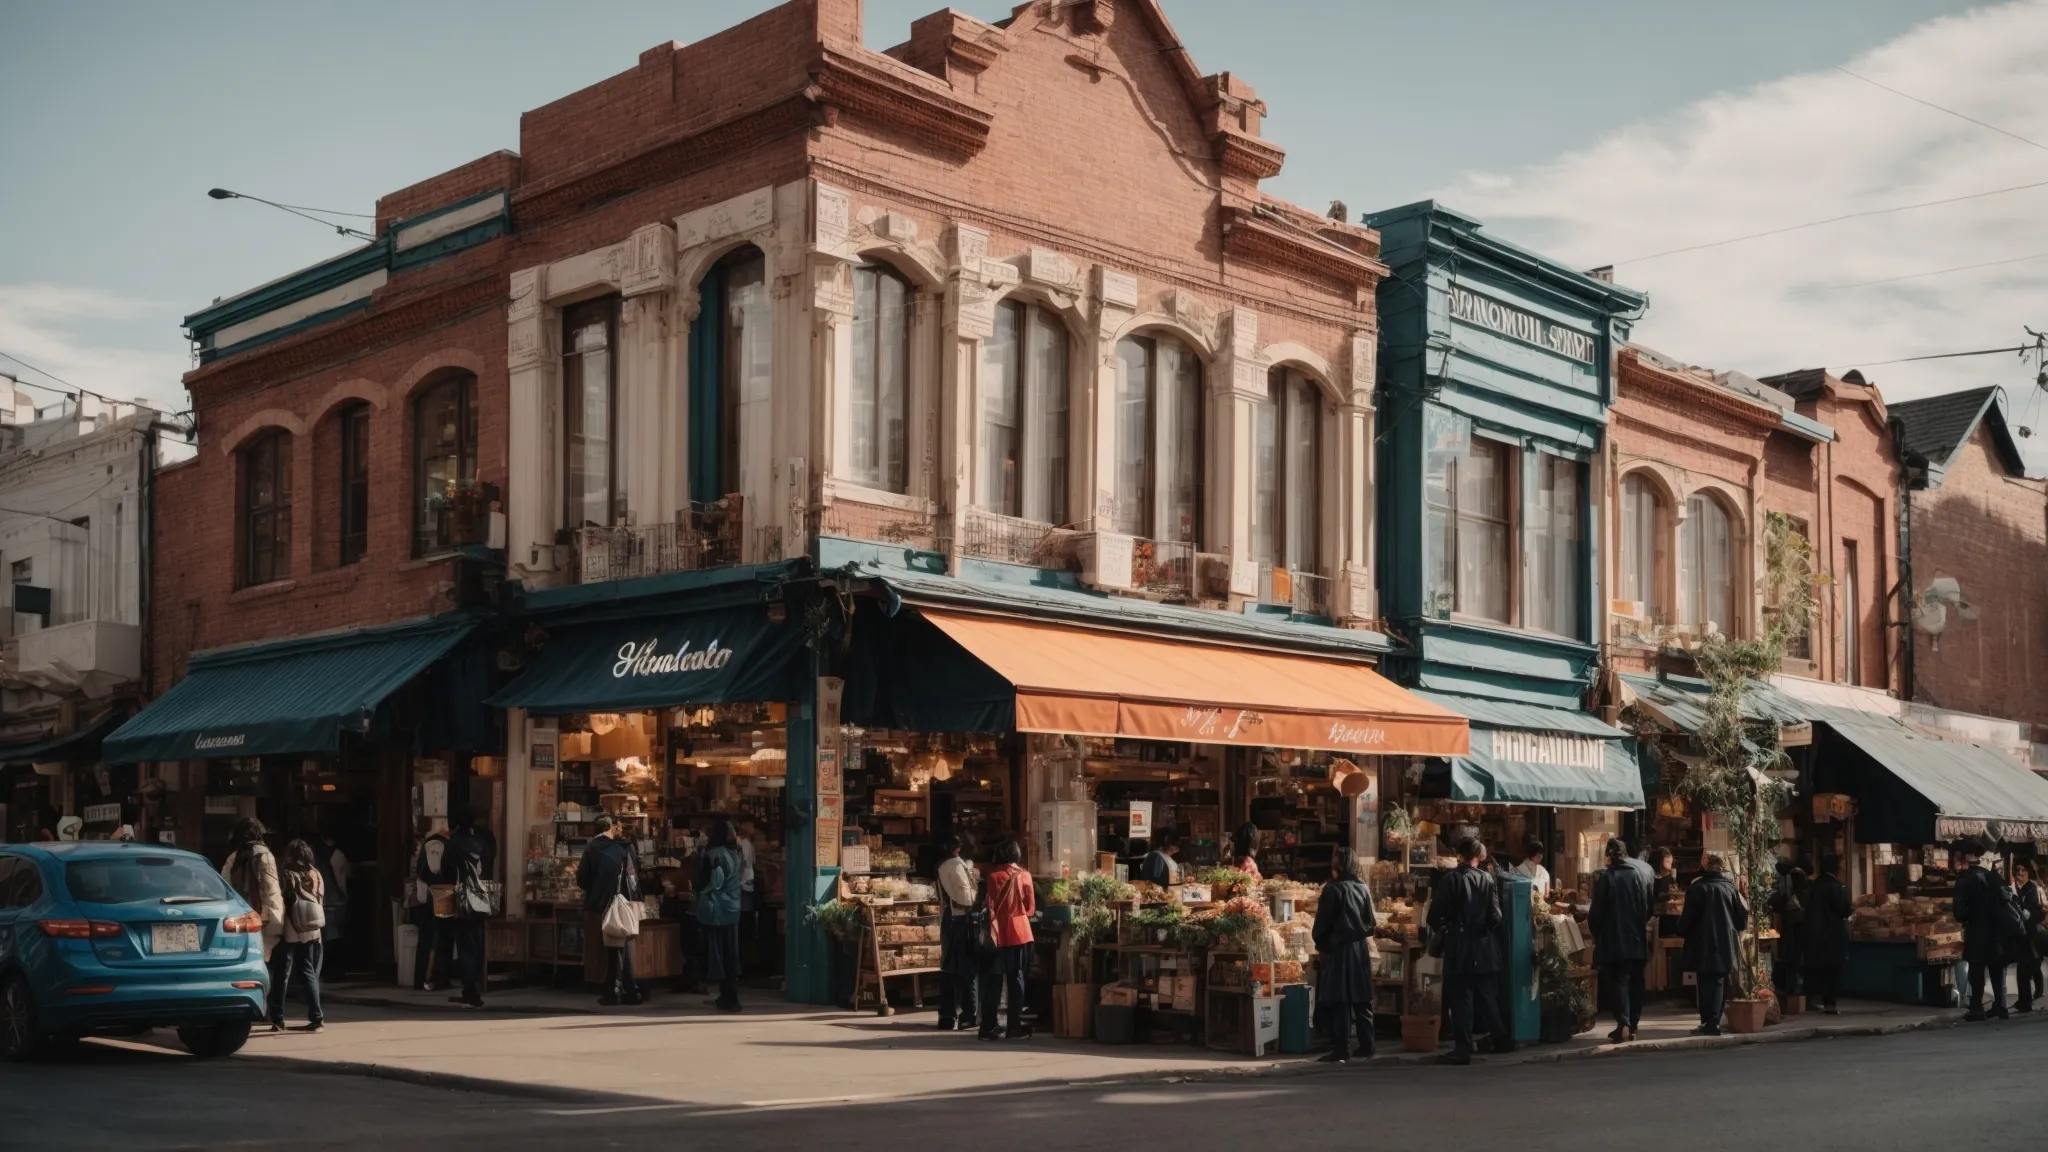 a bustling urban street scene with diverse shops and restaurants, highlighting the vibrant local business community.